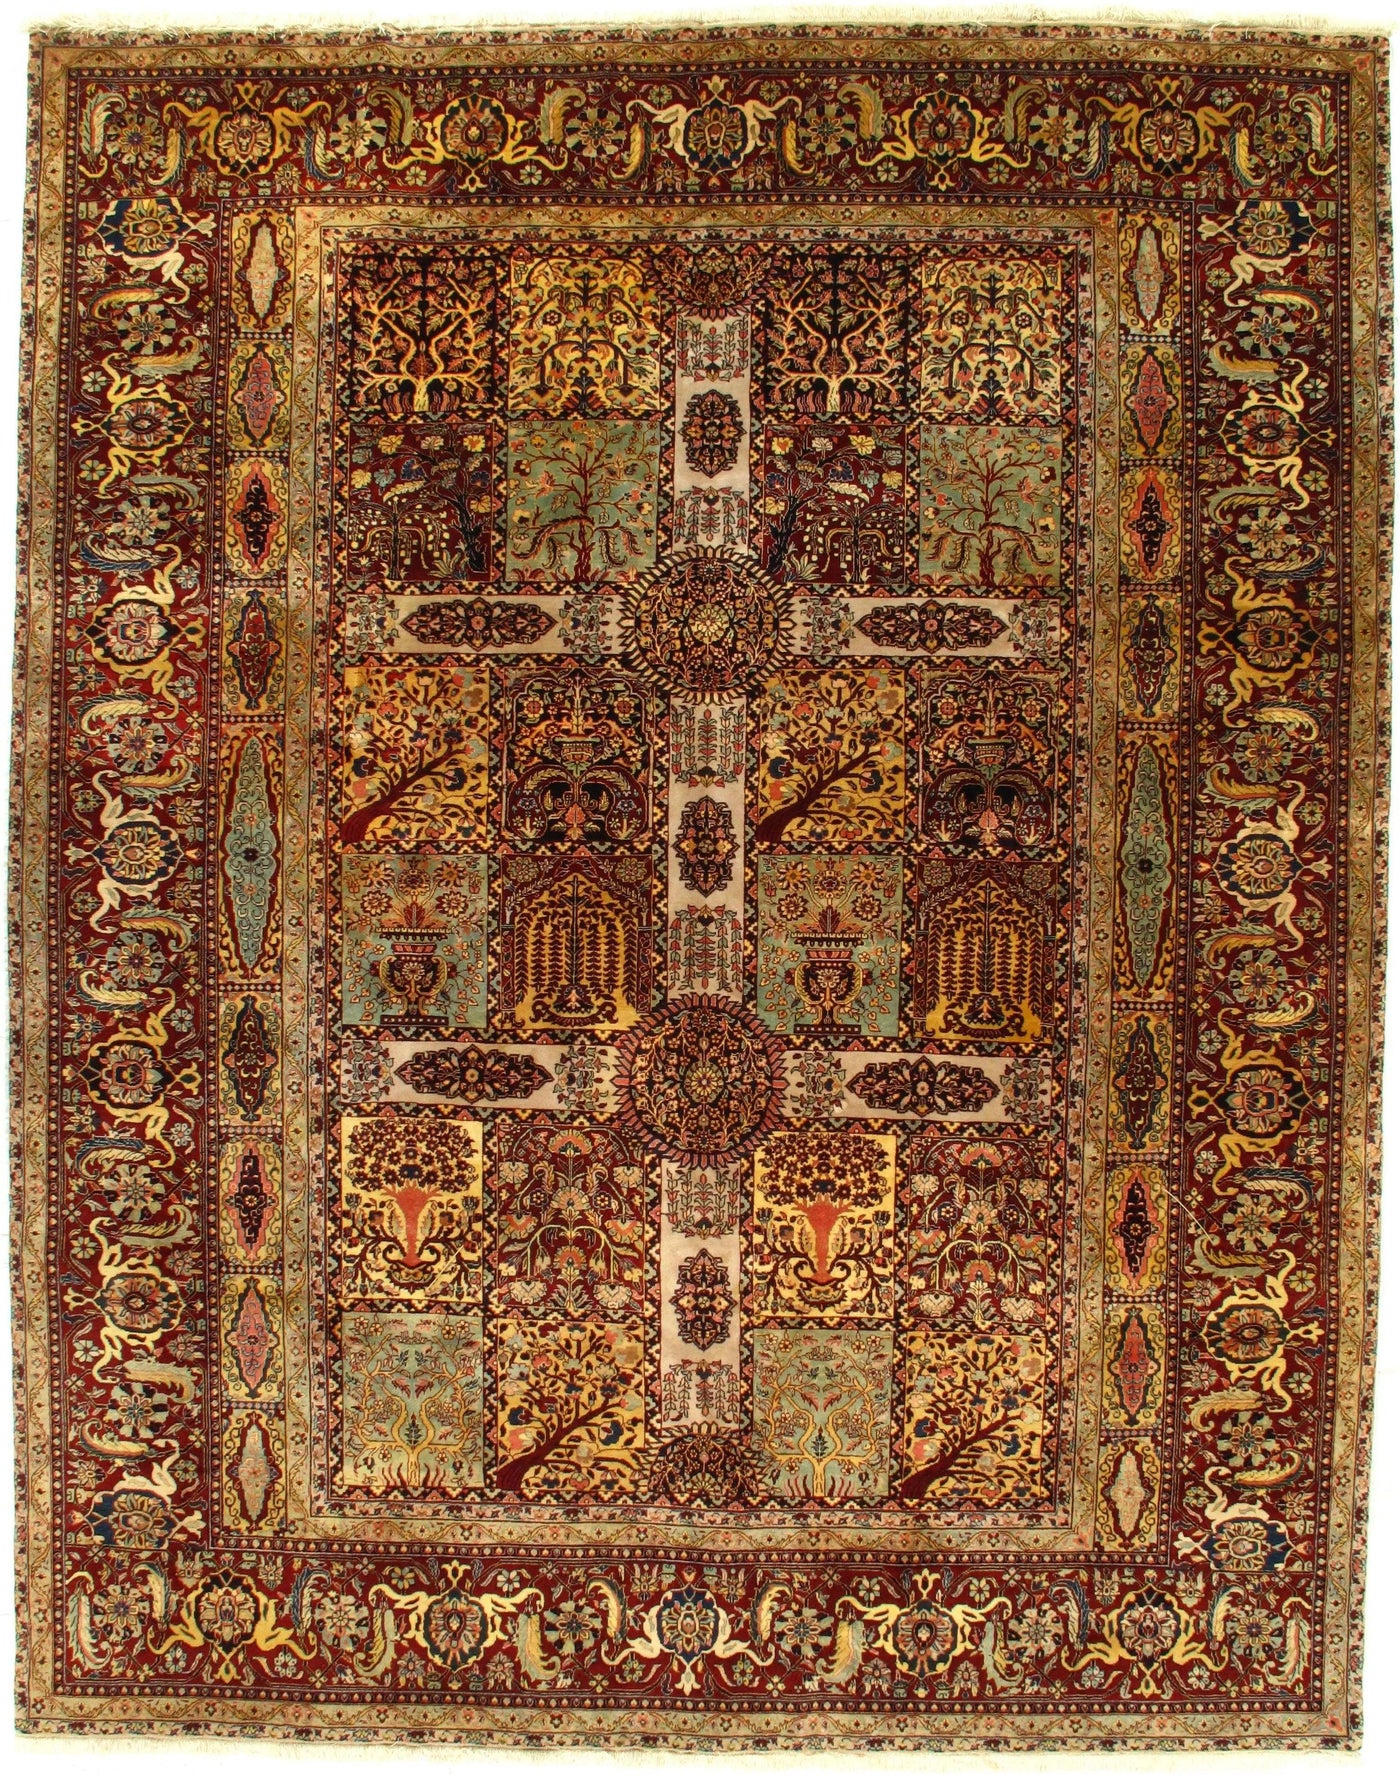 Multi color Indian Agra Rug - 9' X 12'